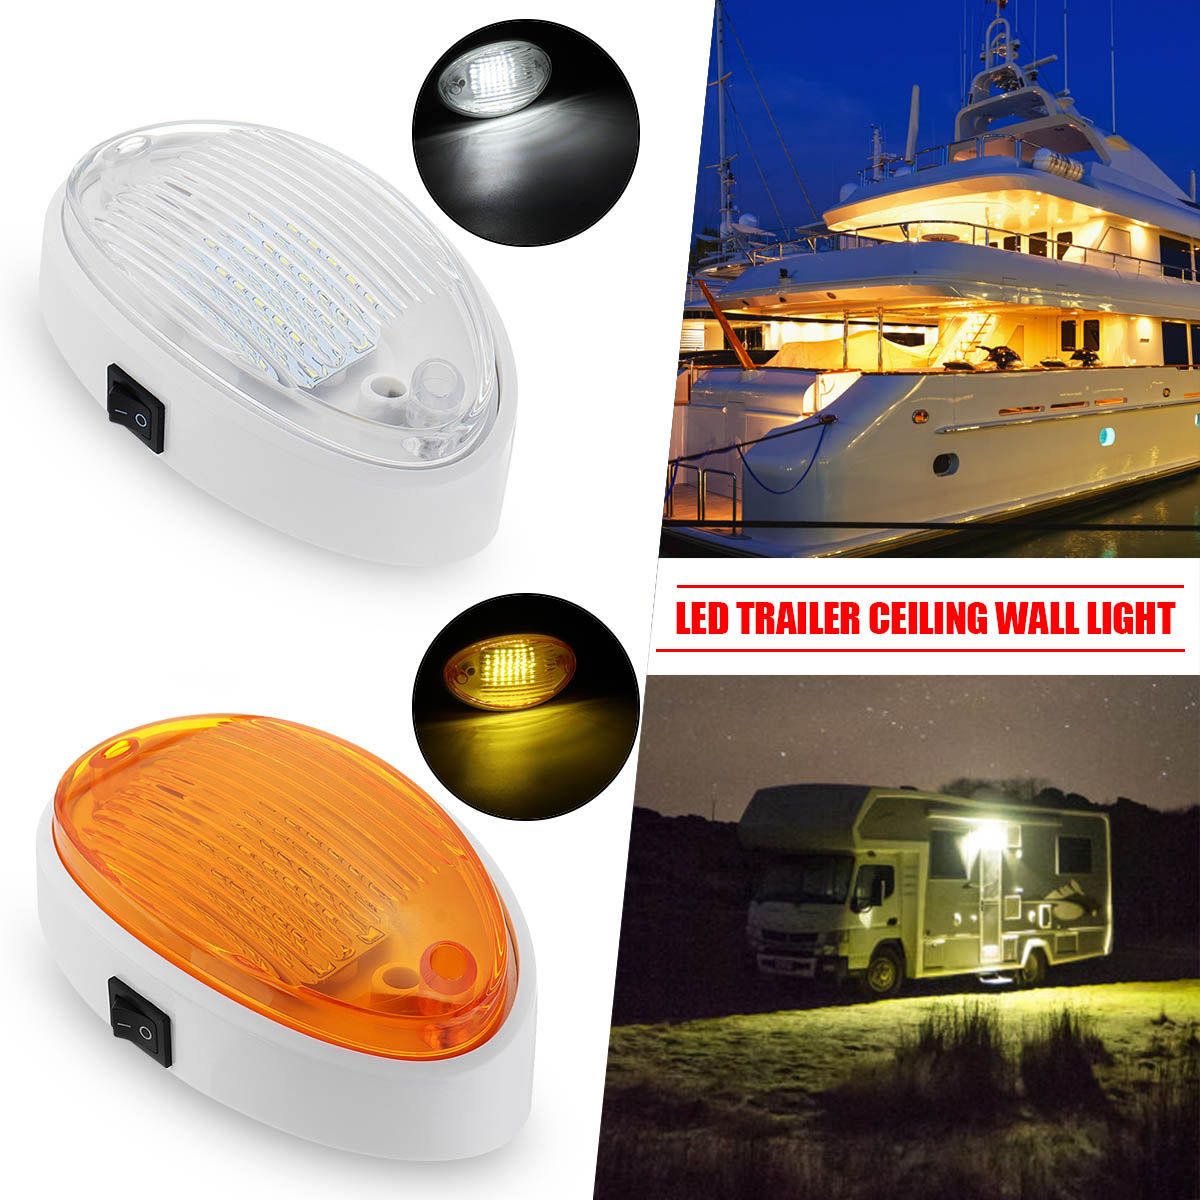 3528-SMD-24LED-Ceiling-Wall-Work-Light-321904963958--for-TrailerVanYachtBoatCaravan-Interior-450LM-1-1637200